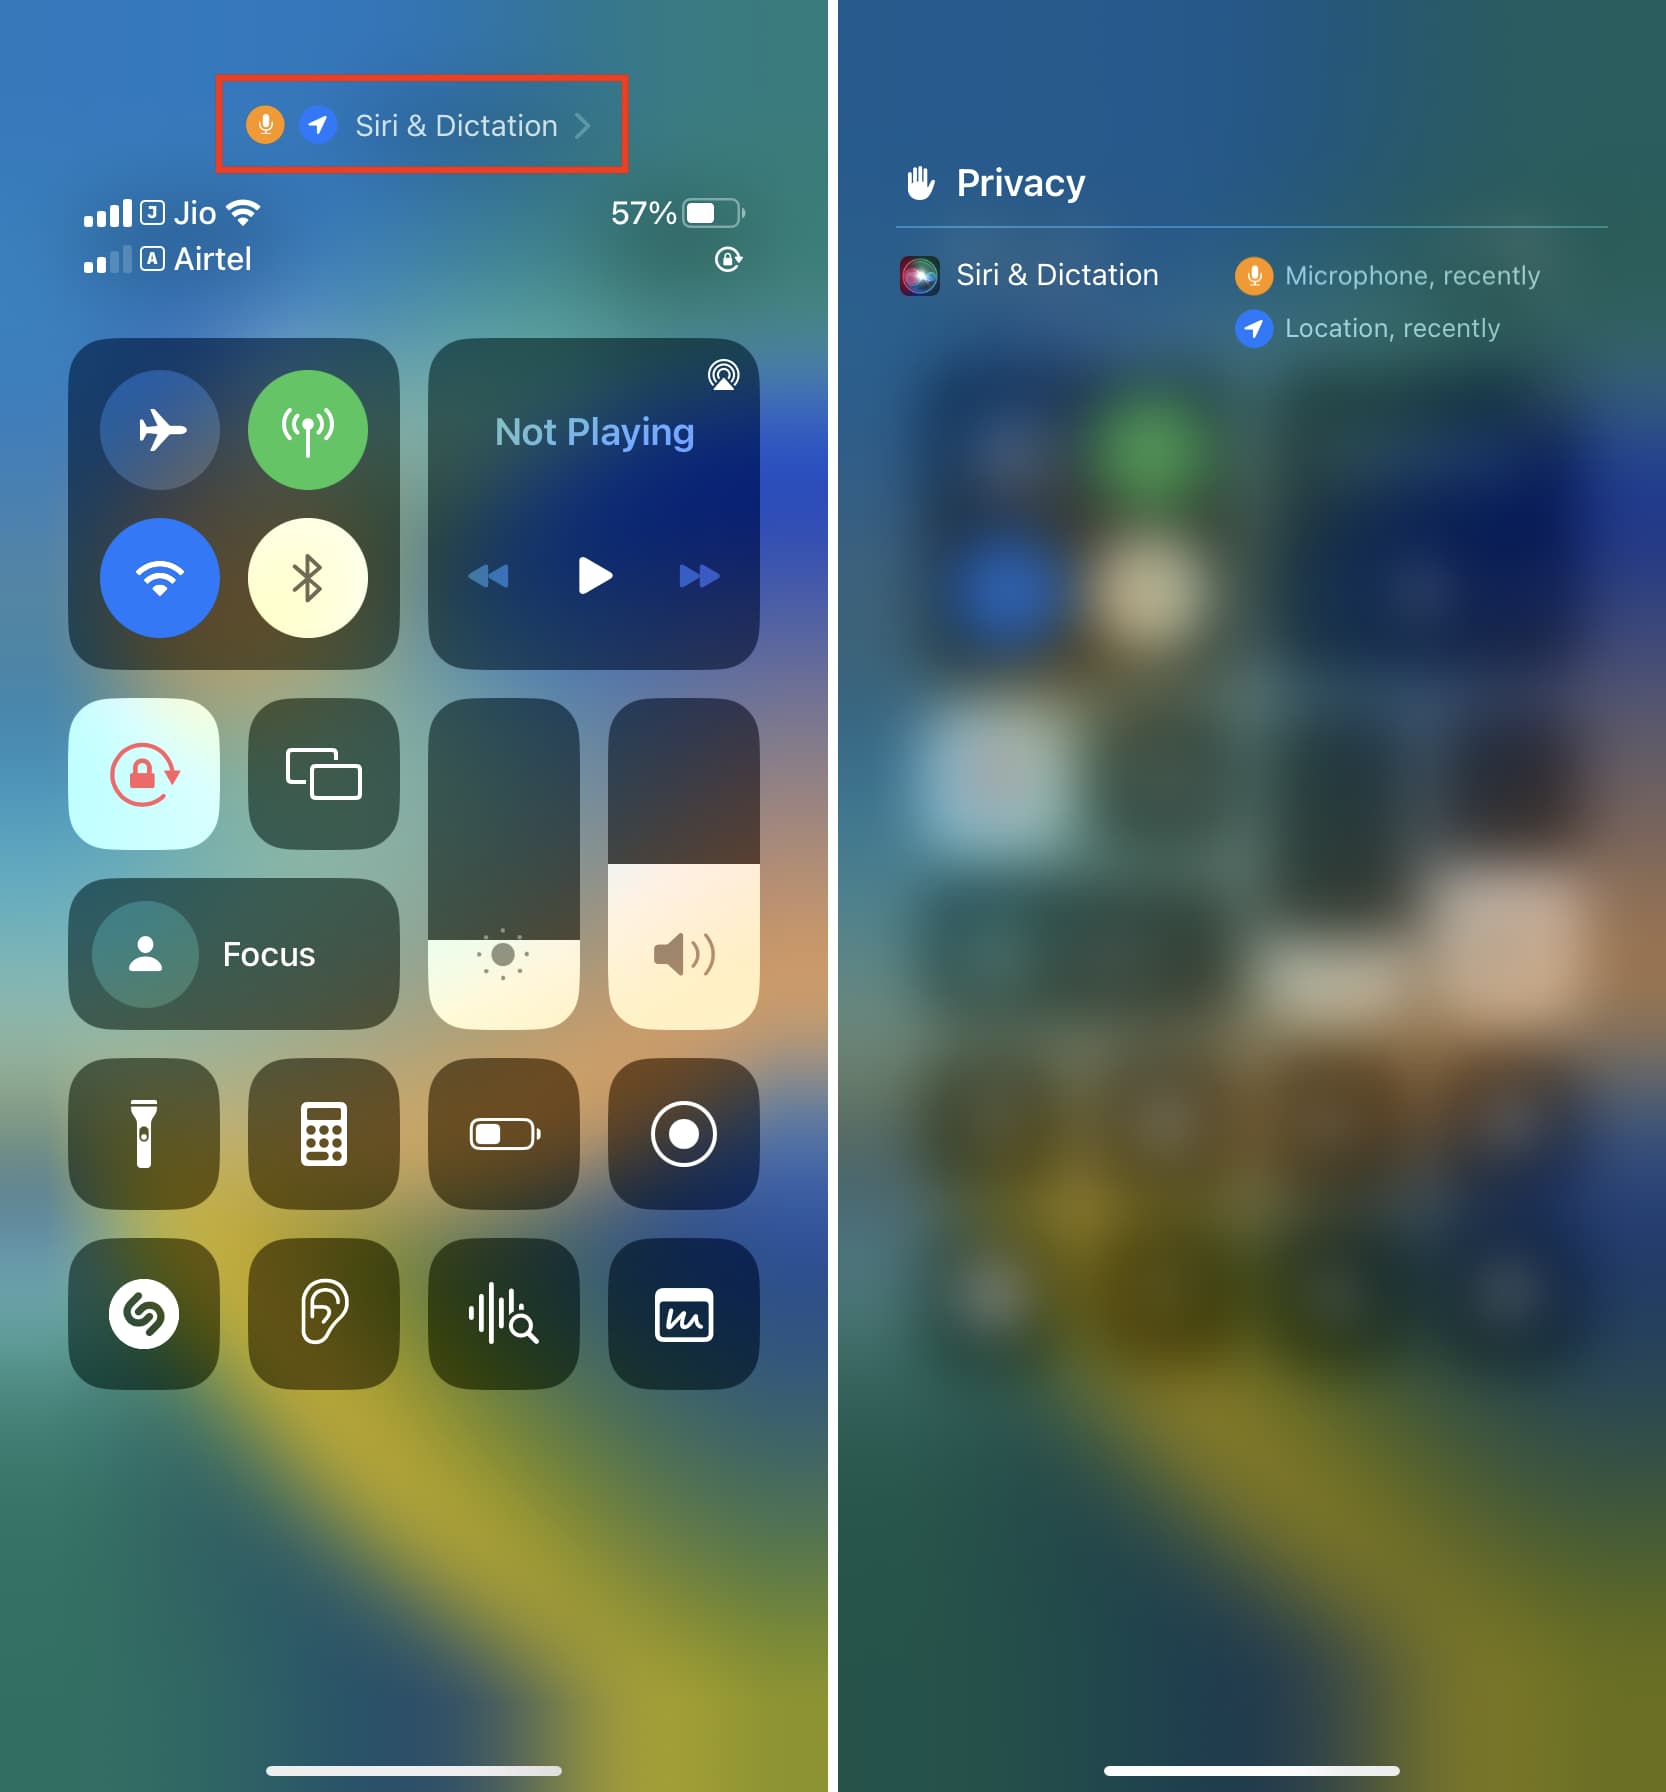 Privacy screen in iPhone Control Center